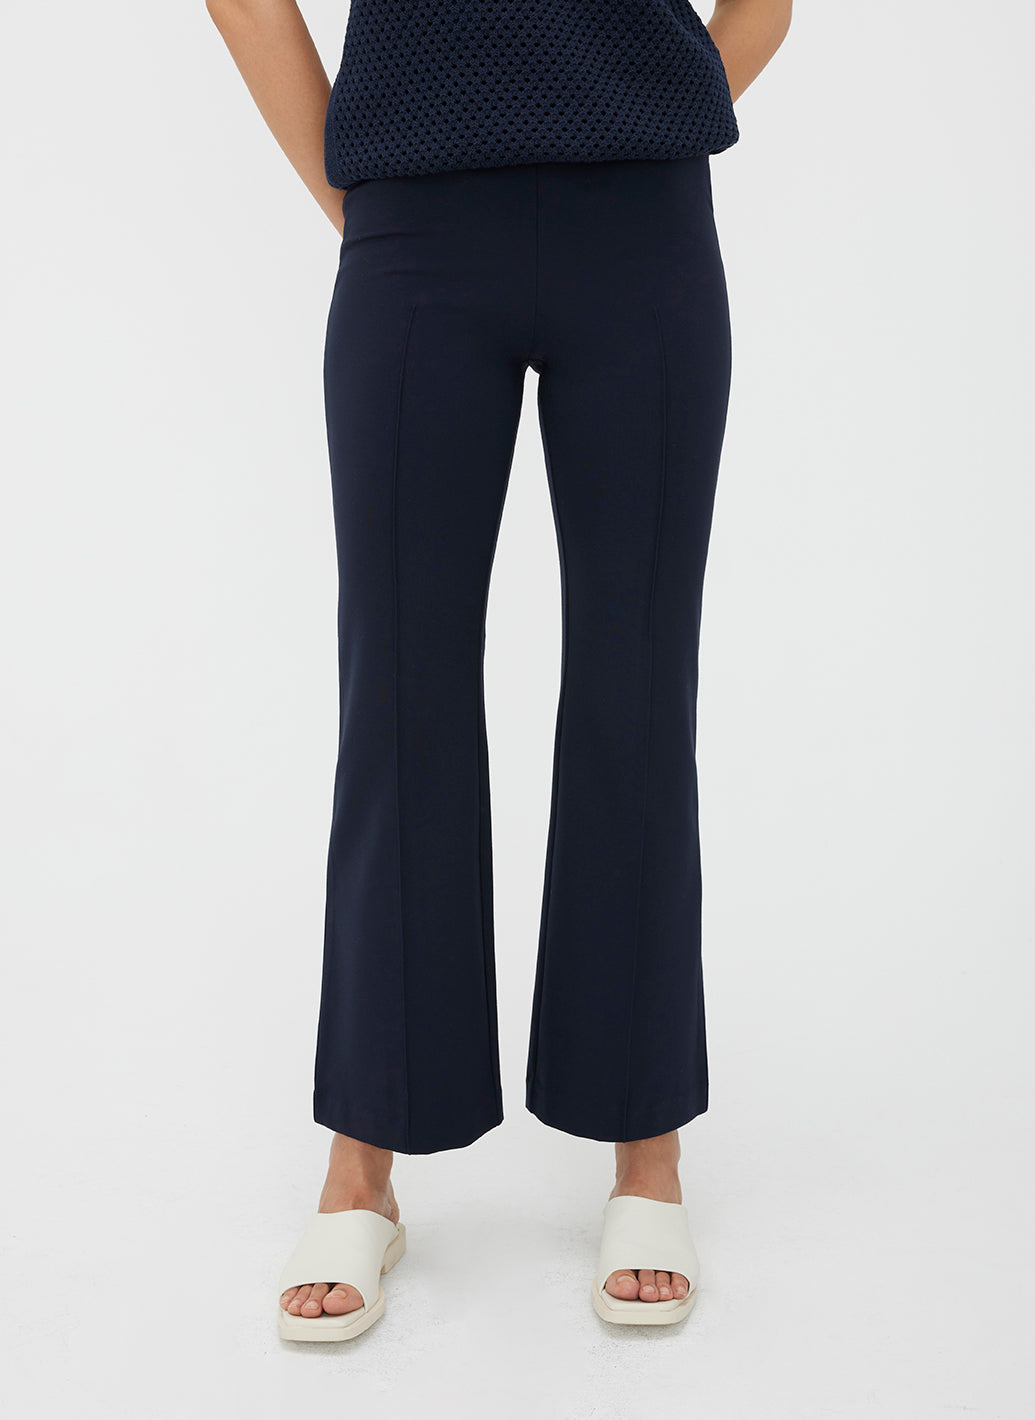 Serenity Flared Pull On Pants